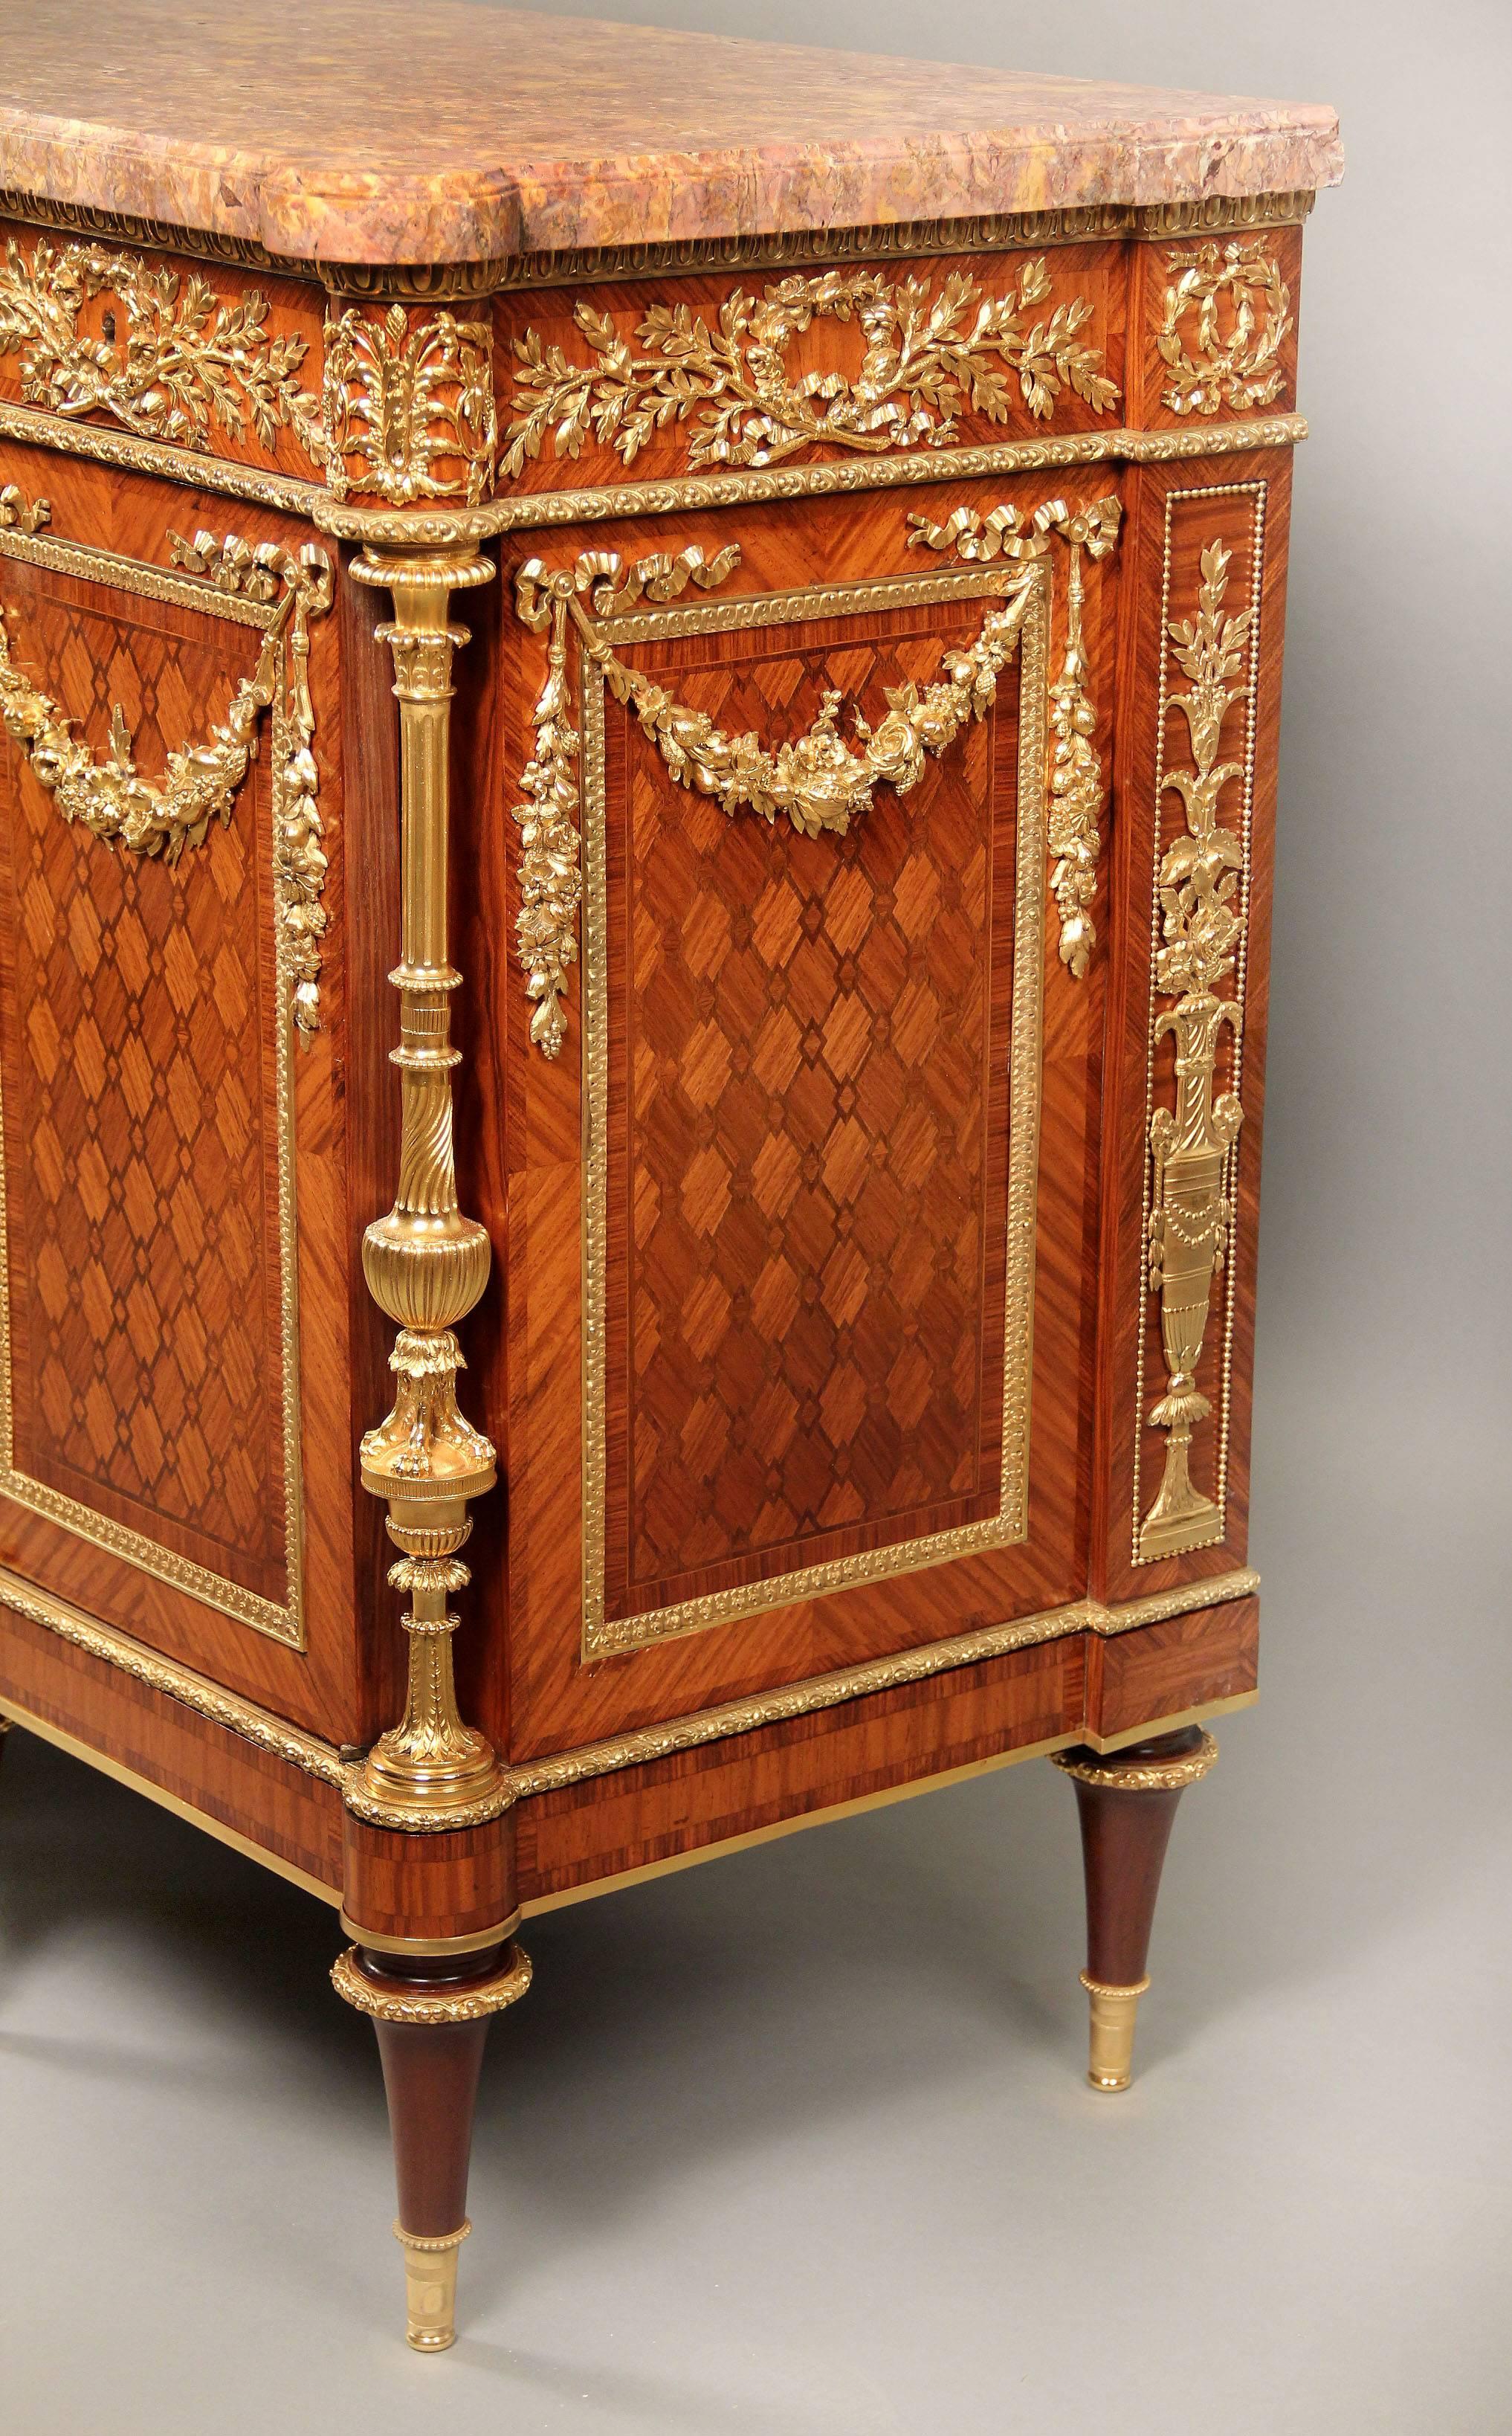 French Fantastic Late 19th Century Gilt Bronze and Parquetry Commode by Zwiener Jansen For Sale